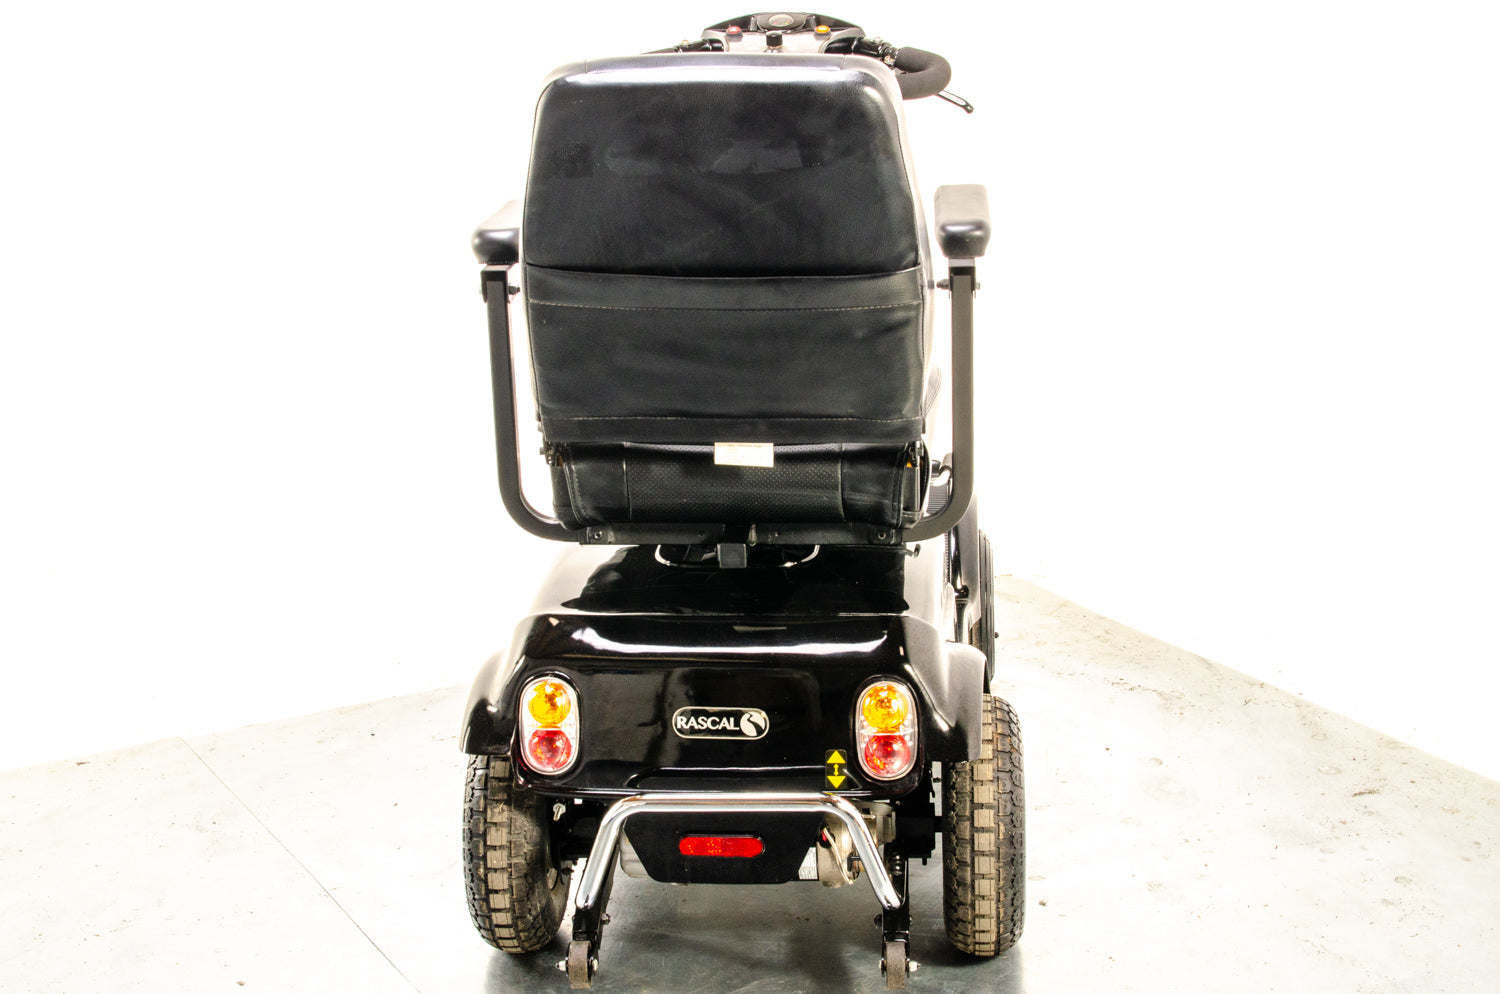 Rascal Frontier All-Terrain Off-Road Used Electric Mobility Scooter 8mph Suspension Midsize Black 13293